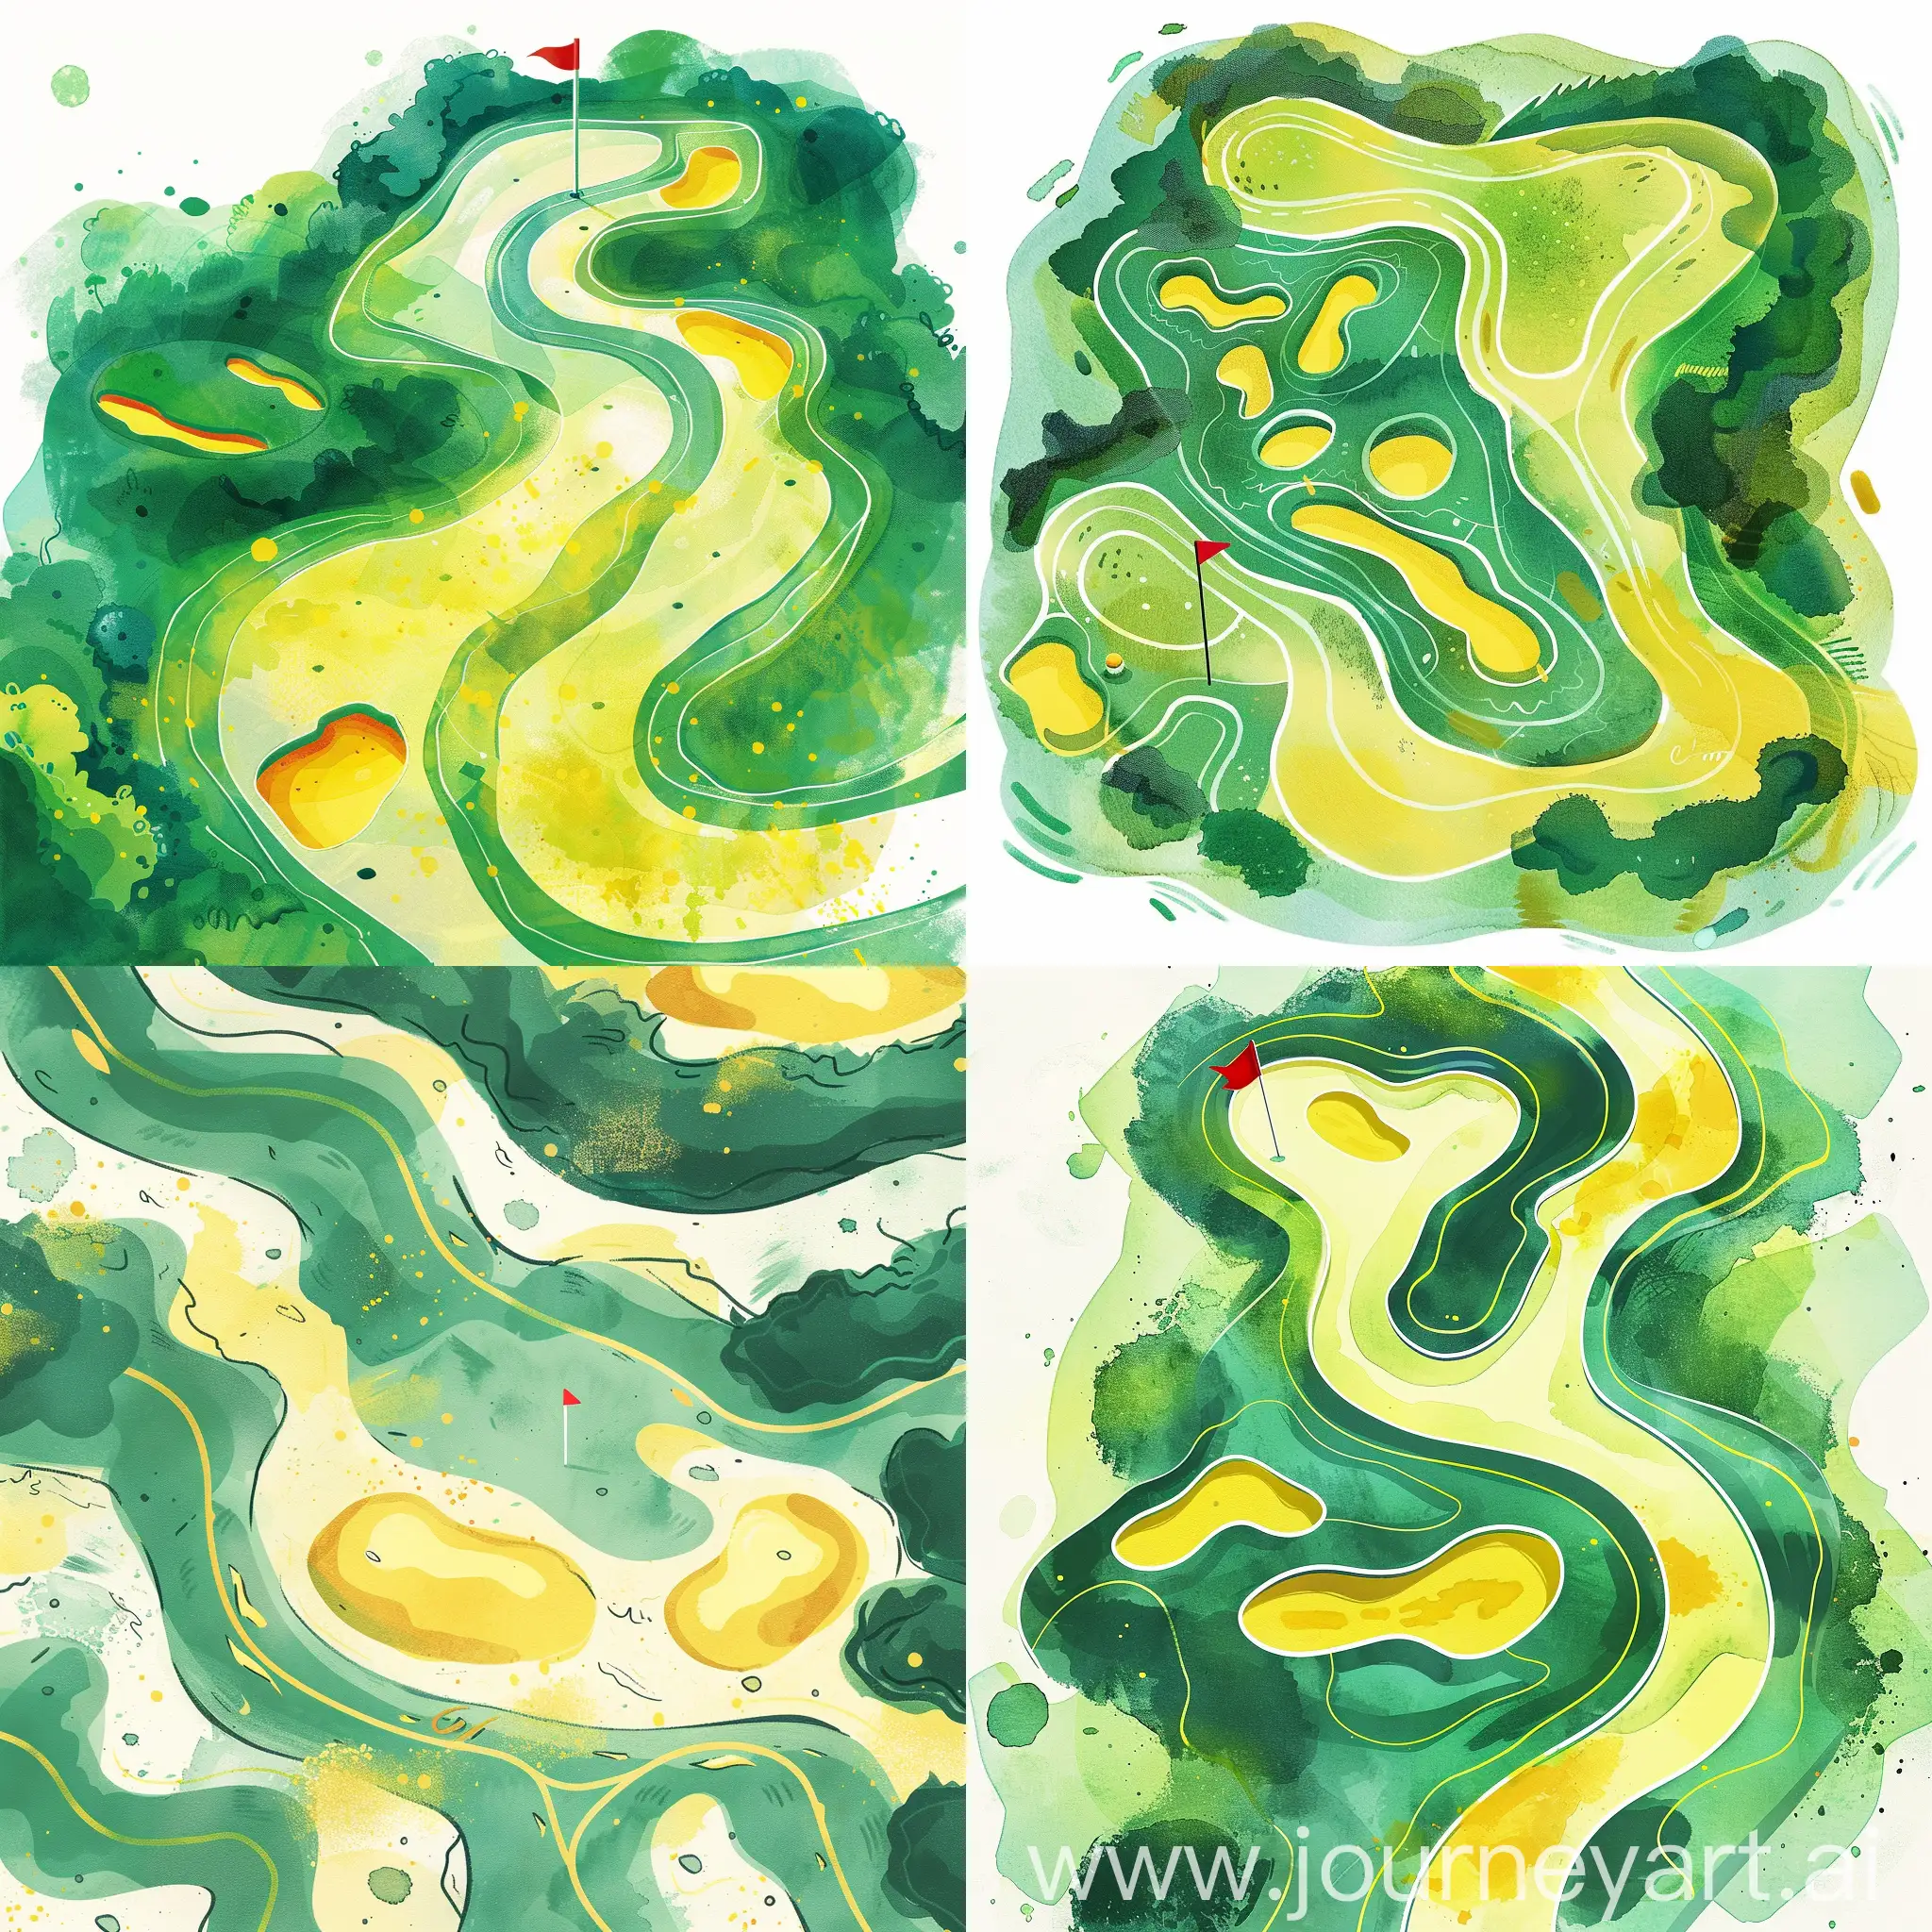 a stylized, watercolor illustration of a miniature golf course. The course consists of vibrant green for the fairway and putting green areas, with yellow sand traps and pale yellow for the greens. Its contours are smooth and wavy, giving the appearance of gentle undulation. The outer edges of the course feature darker green splashes, suggesting rough or foliage. A red flag on a white pole marks the hole location, adding a pop of color. The watercolor effect creates a sense of softness and texture throughout the artwork. The overall image is playful and cartoon-like, suitable for representing a whimsical or family-friendly golfing theme.